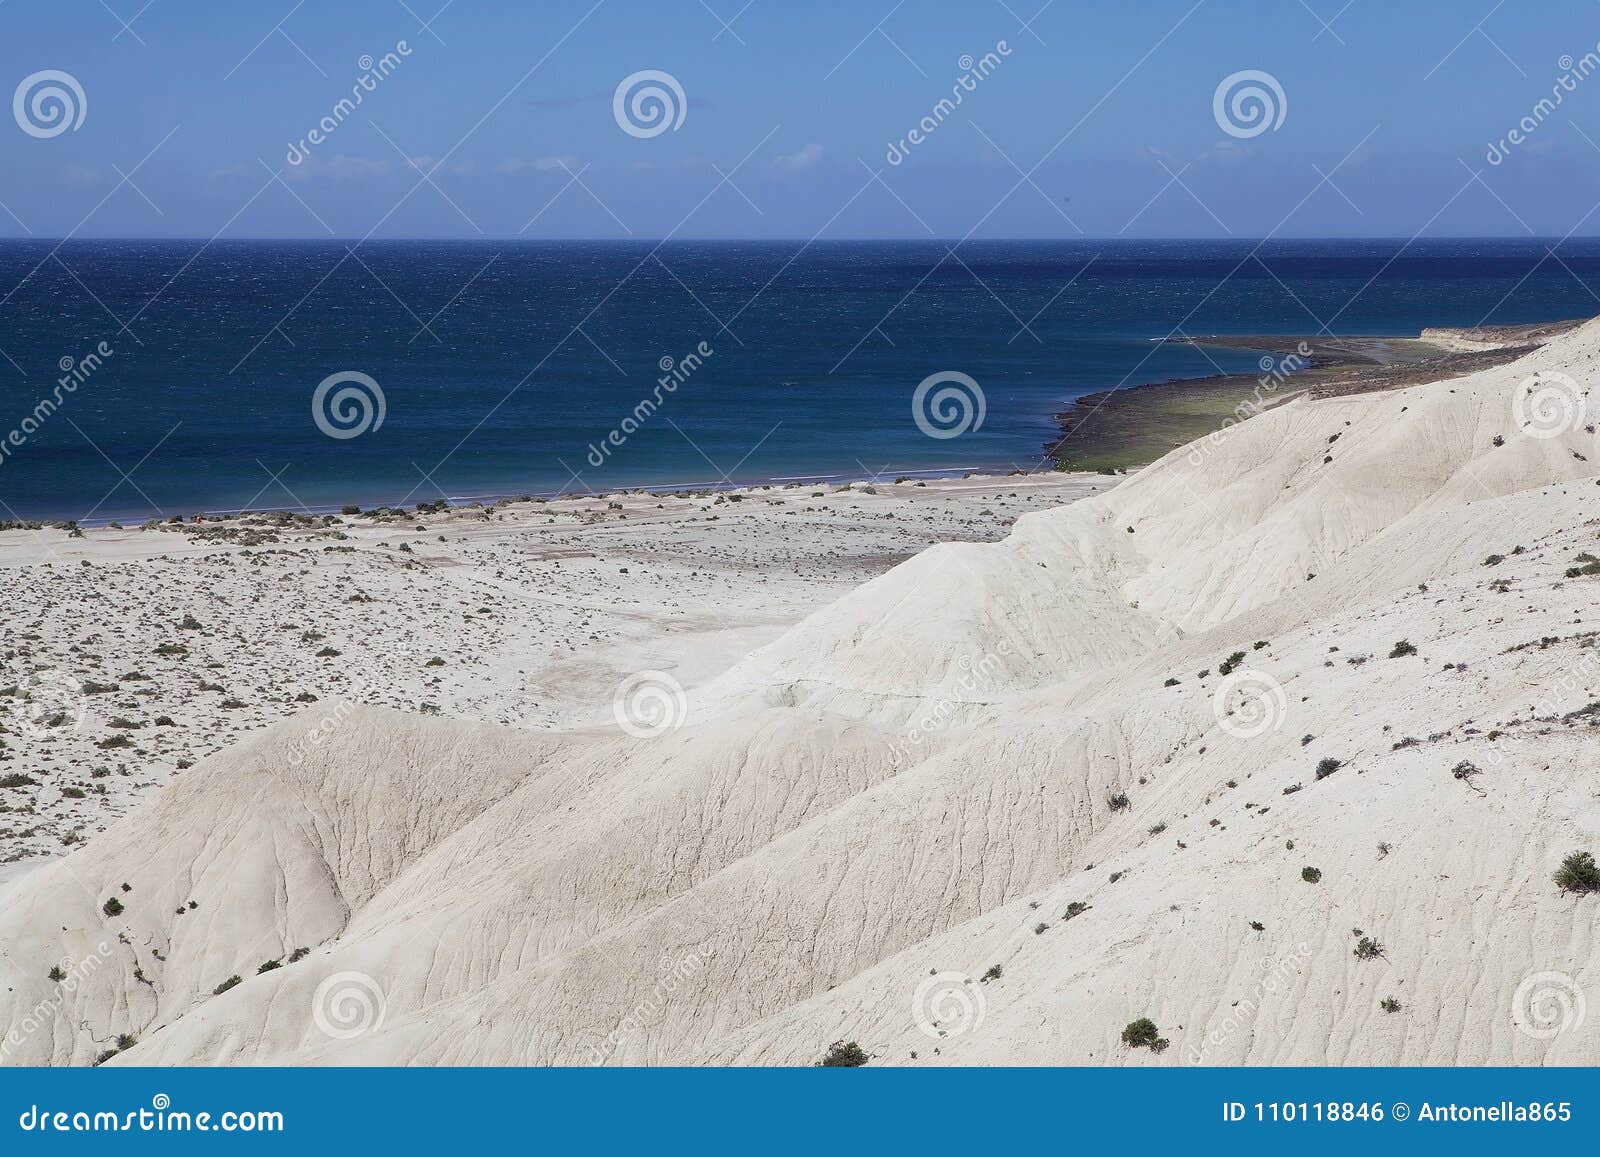 hill after punta loma near puerto madryn, a city in chubut province, patagonia, argentina